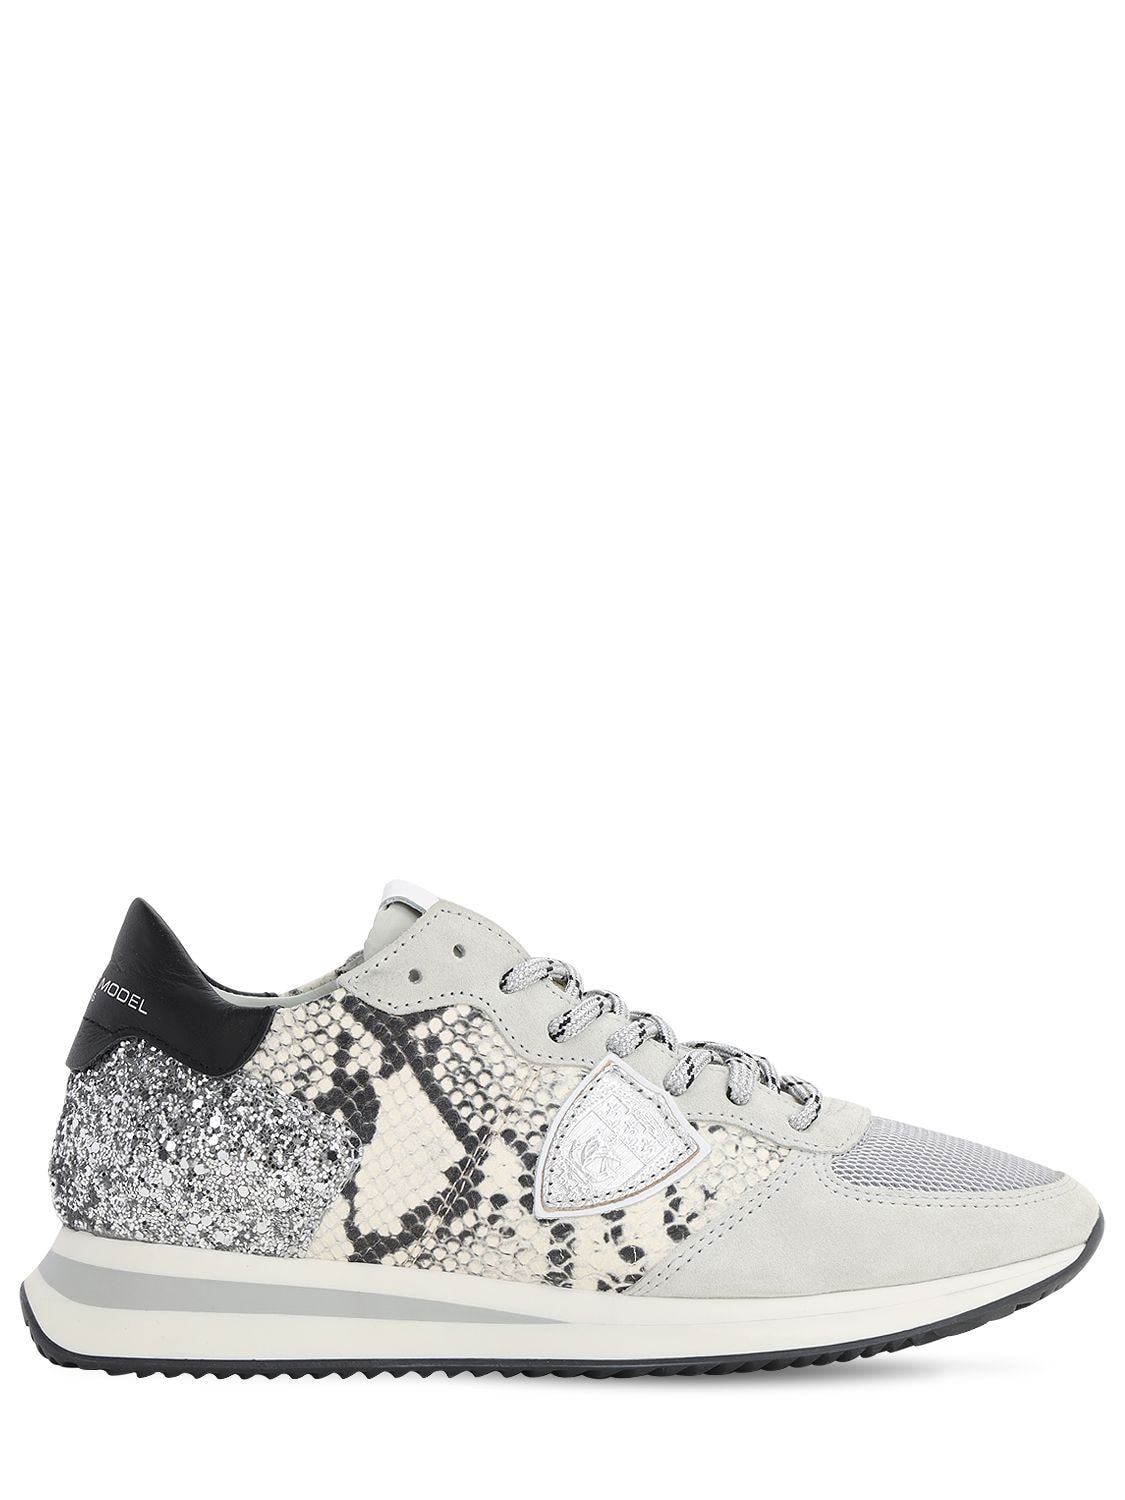 Philippe Model Trpx Phyton Print Glittered Trainers In Grey